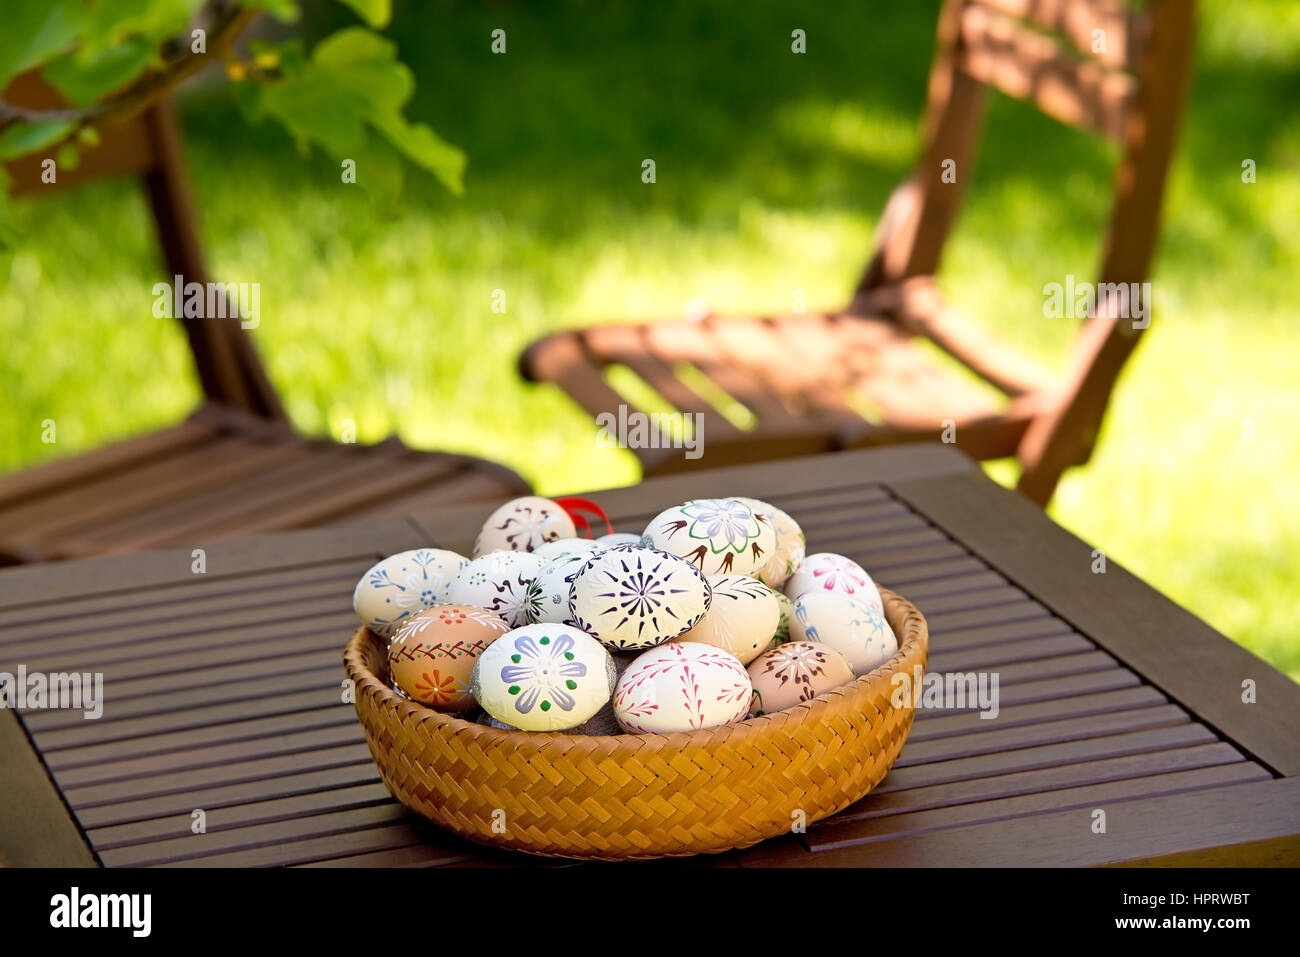 Easter Eggs On The Wooden Table In The Garden Stock Photo